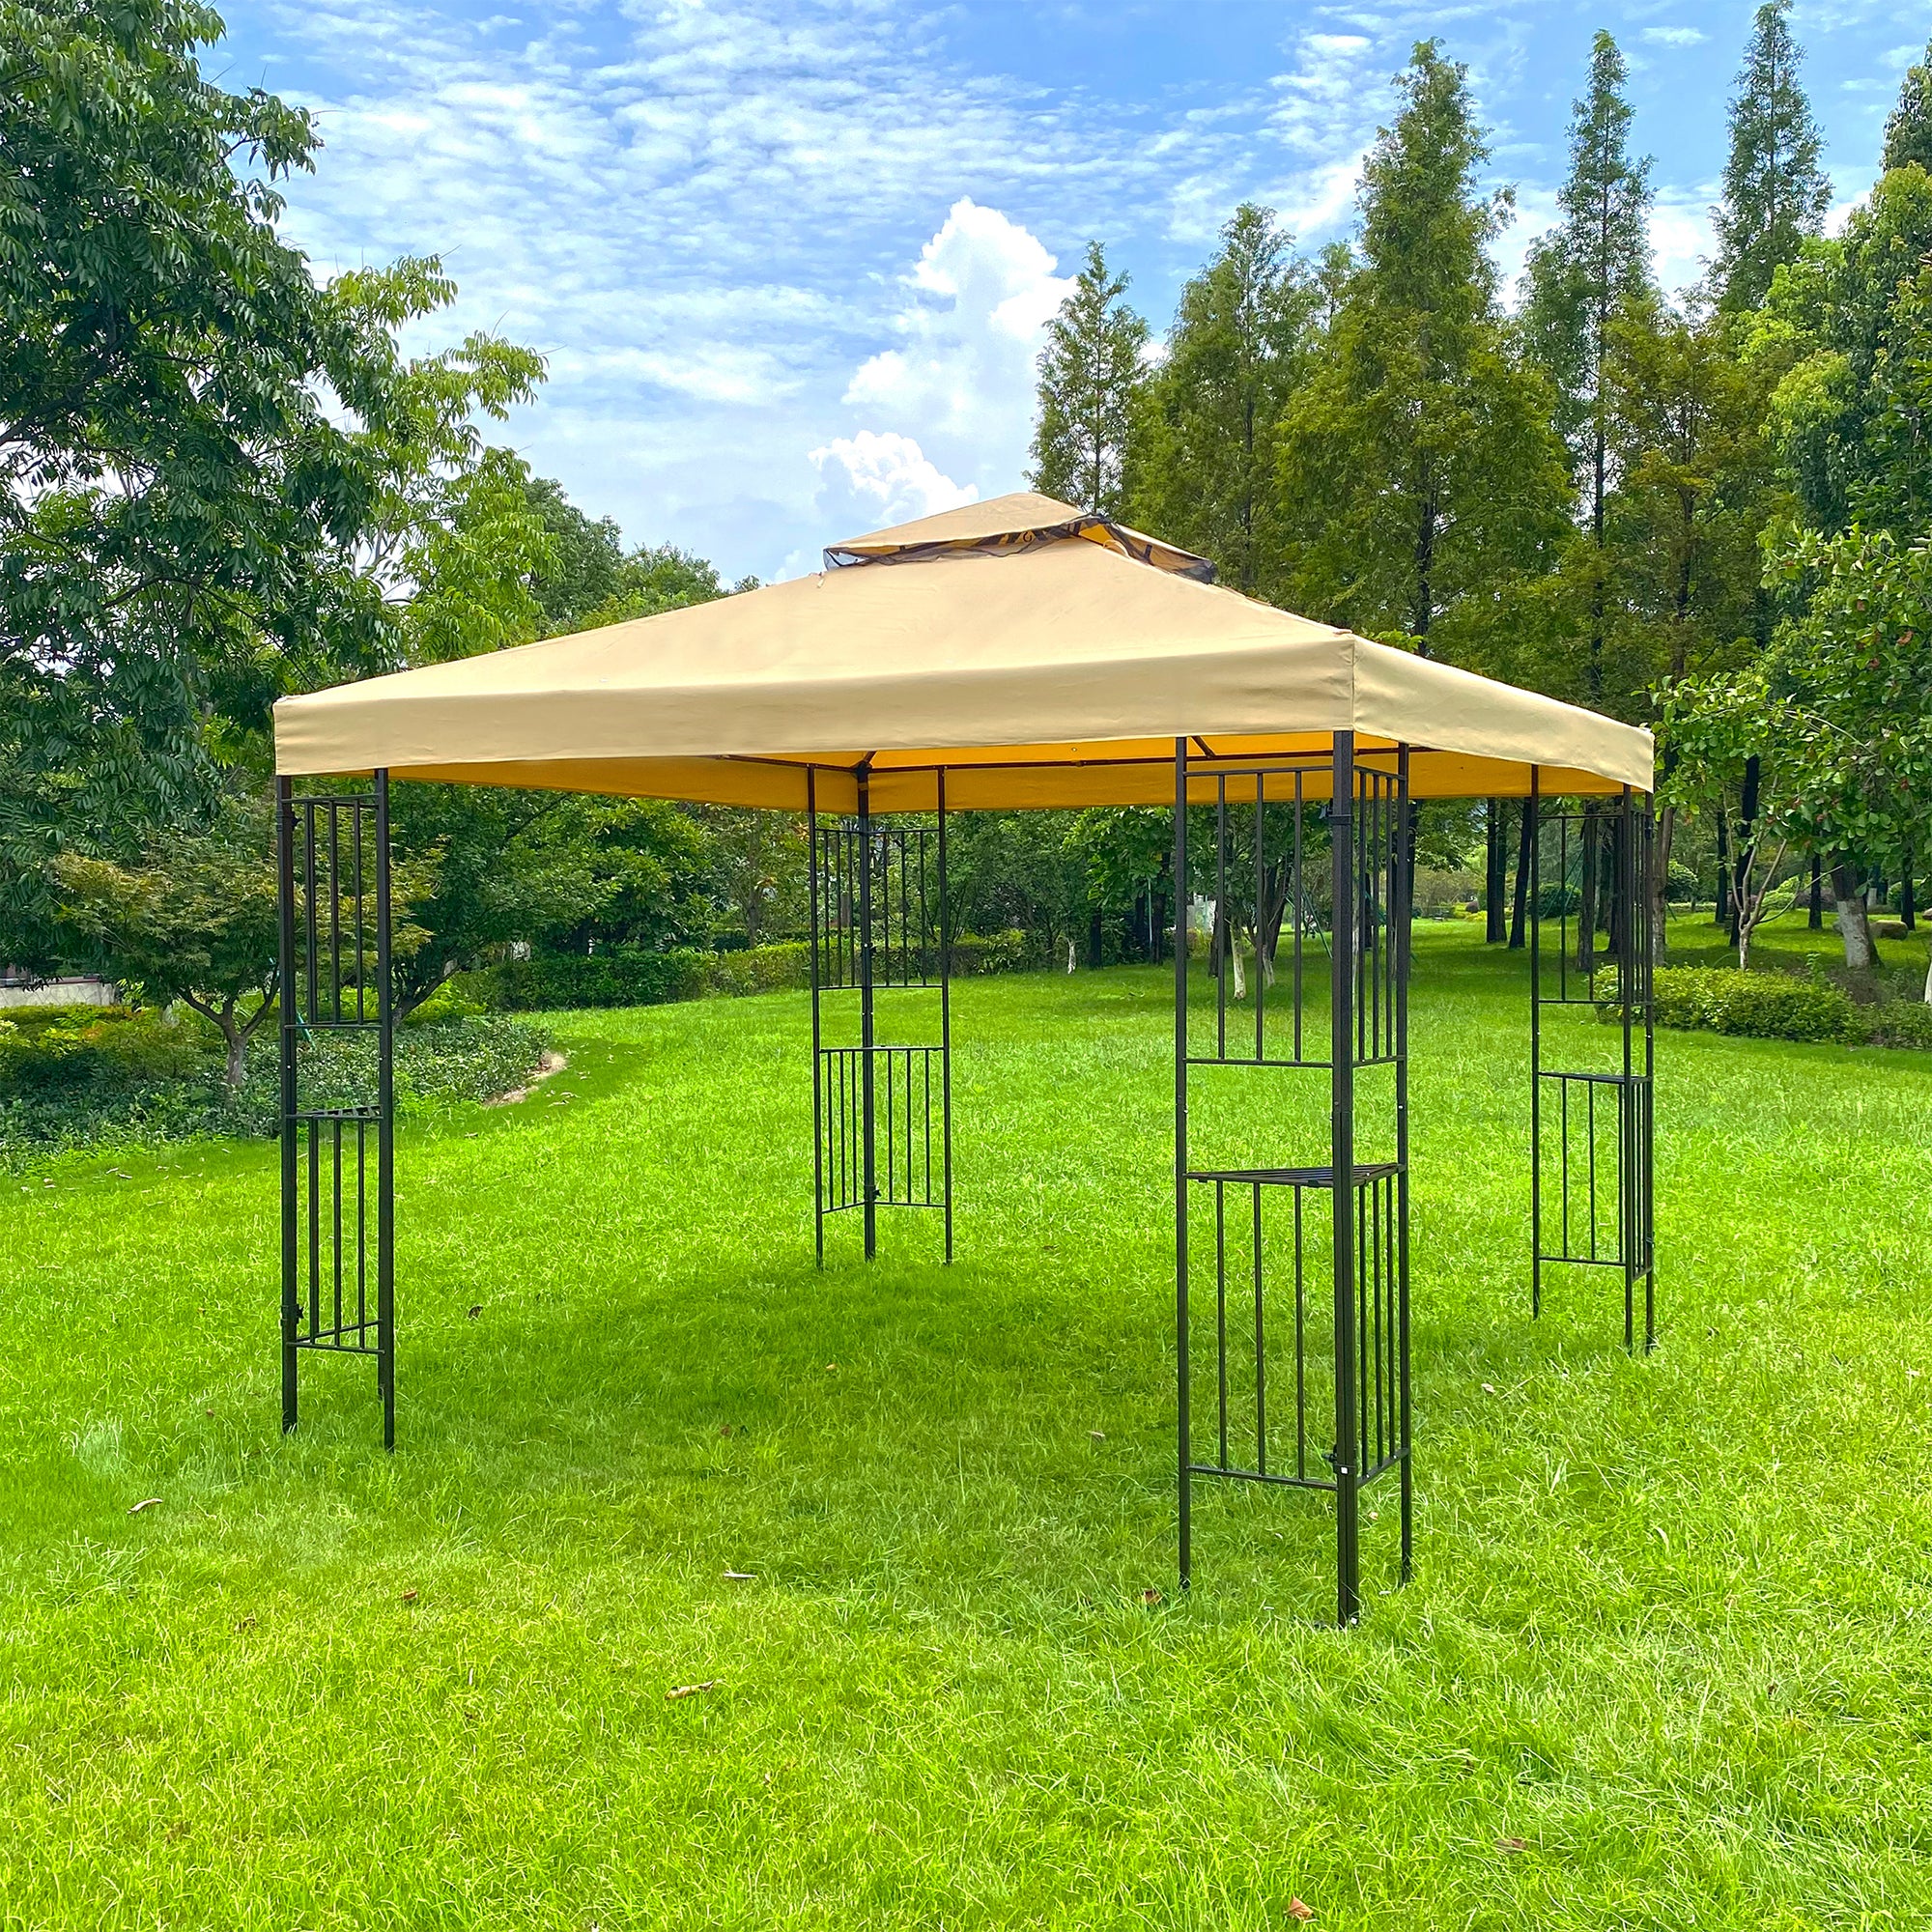 Outdoor Patio Gazebo Canopy Tent With Double Roof And Mosquito Net